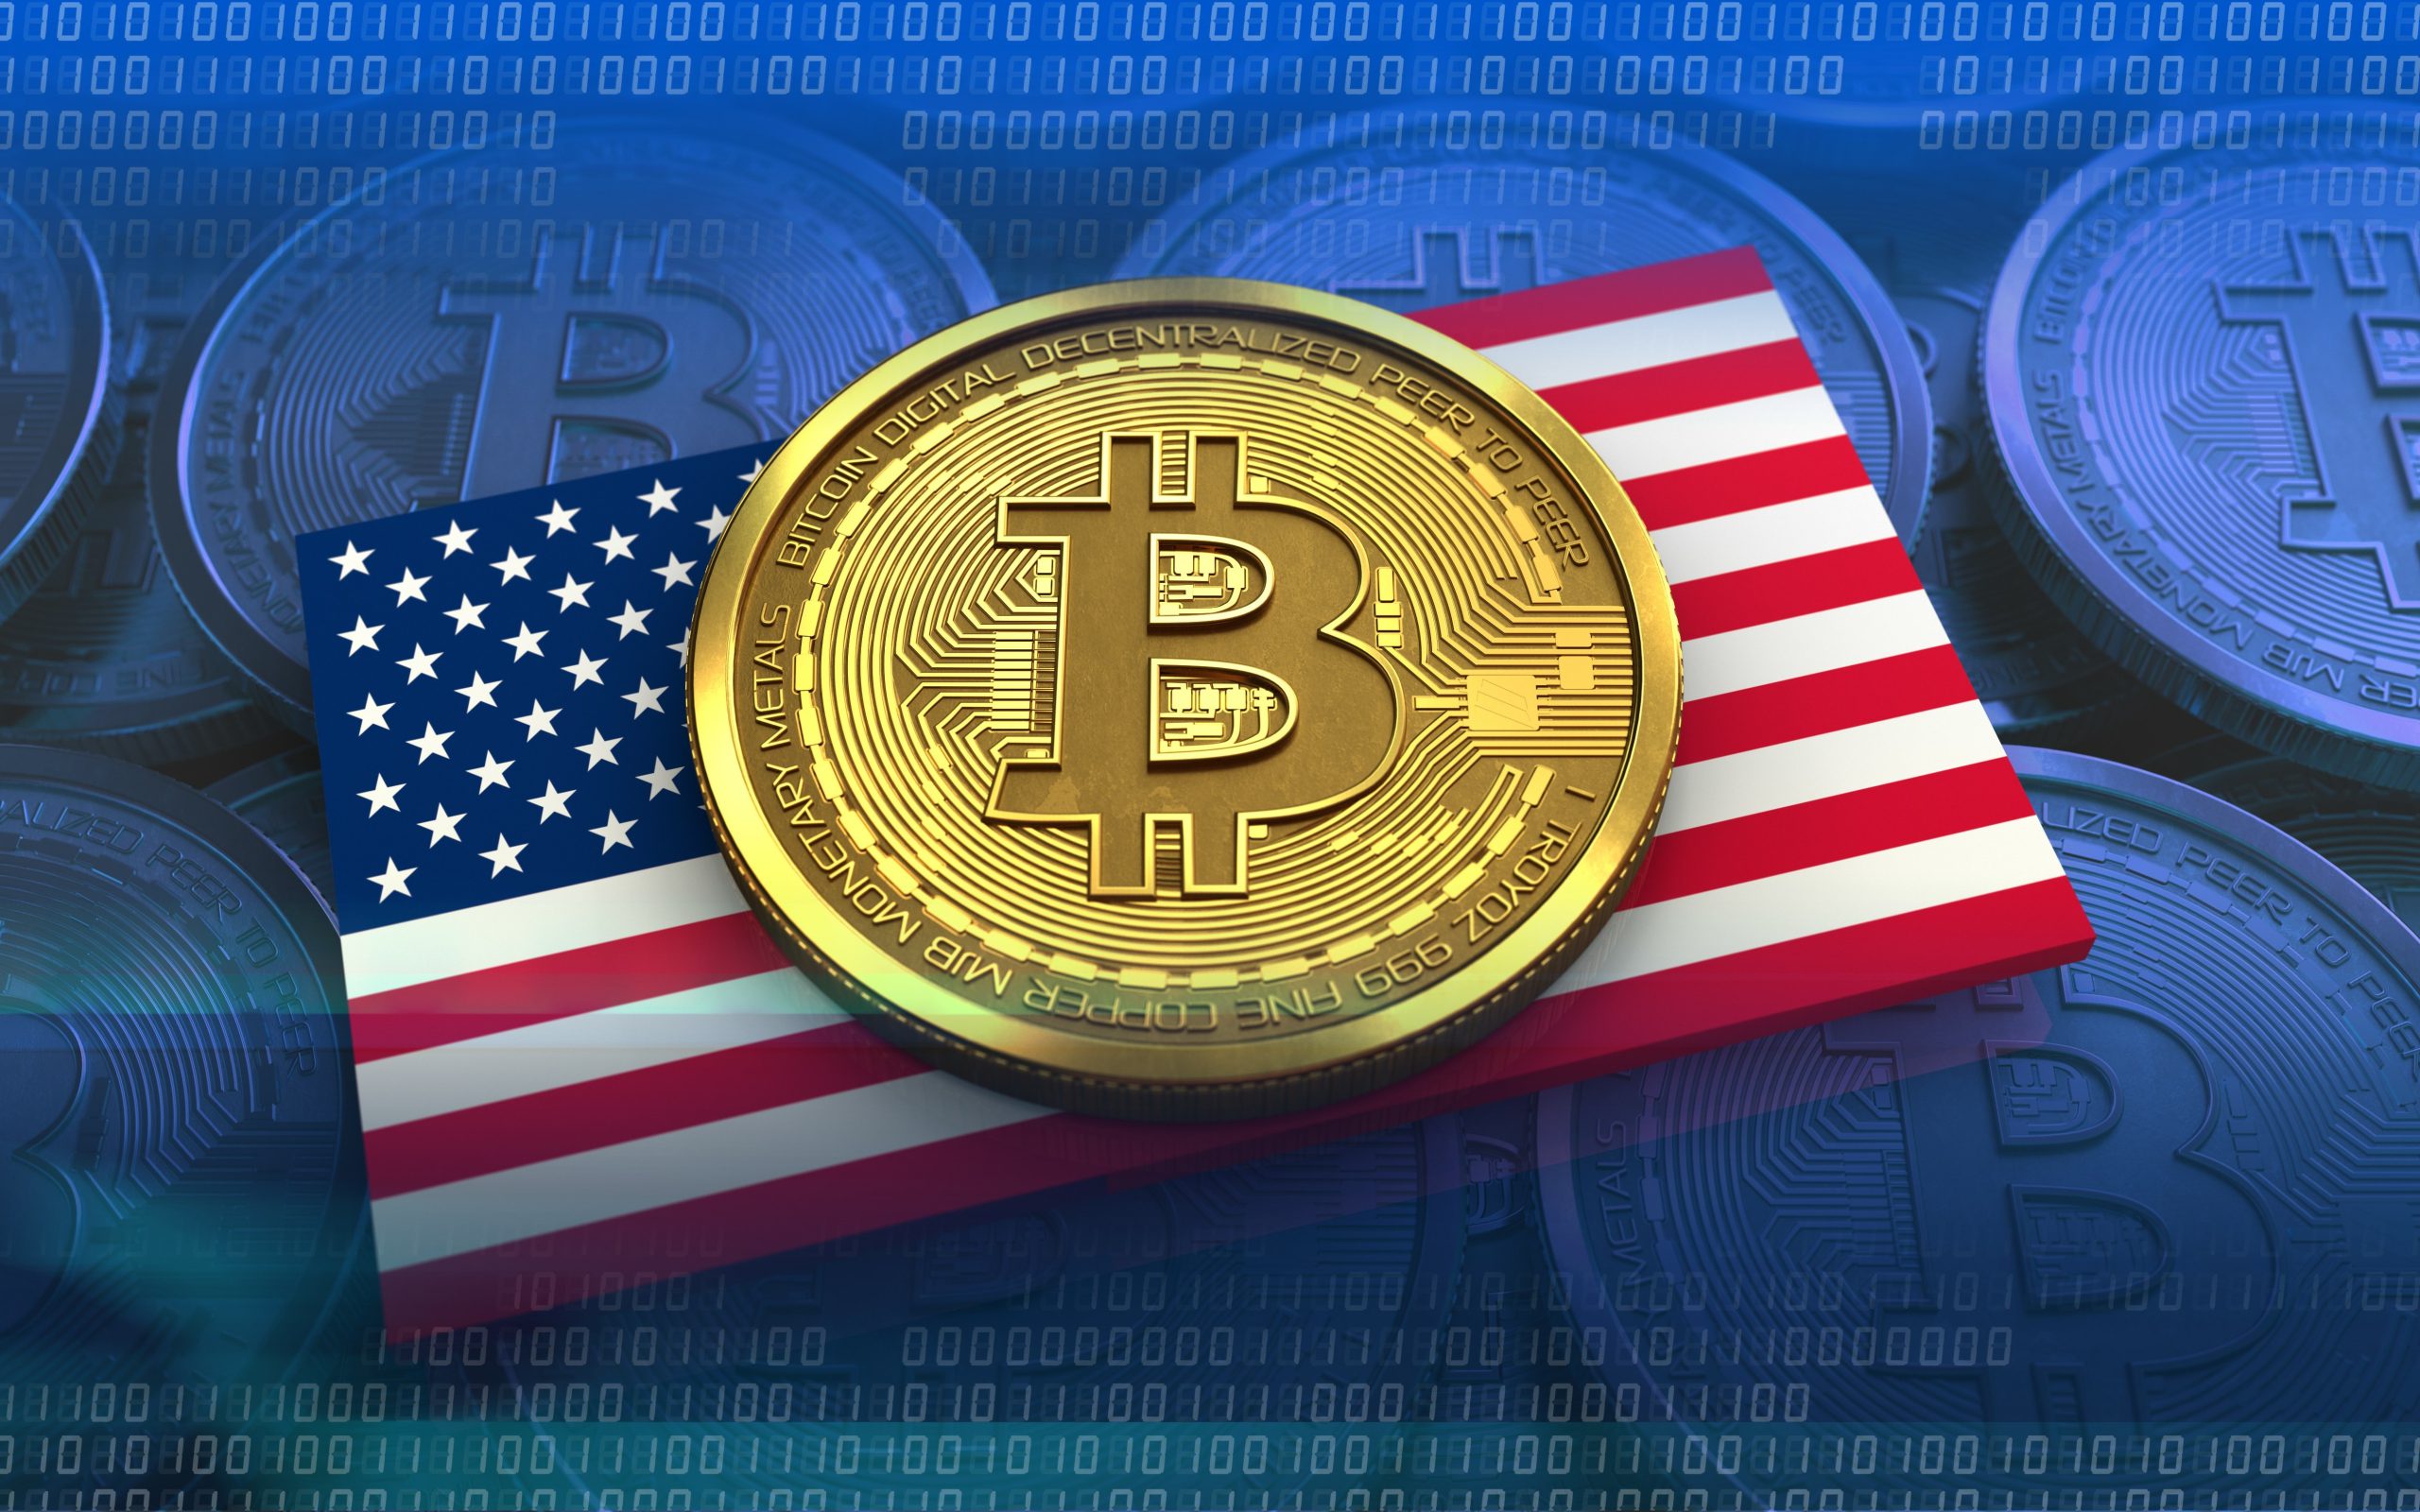 Why Bitcoin Price May Rise Despite Dramatic US Inflation Rates
